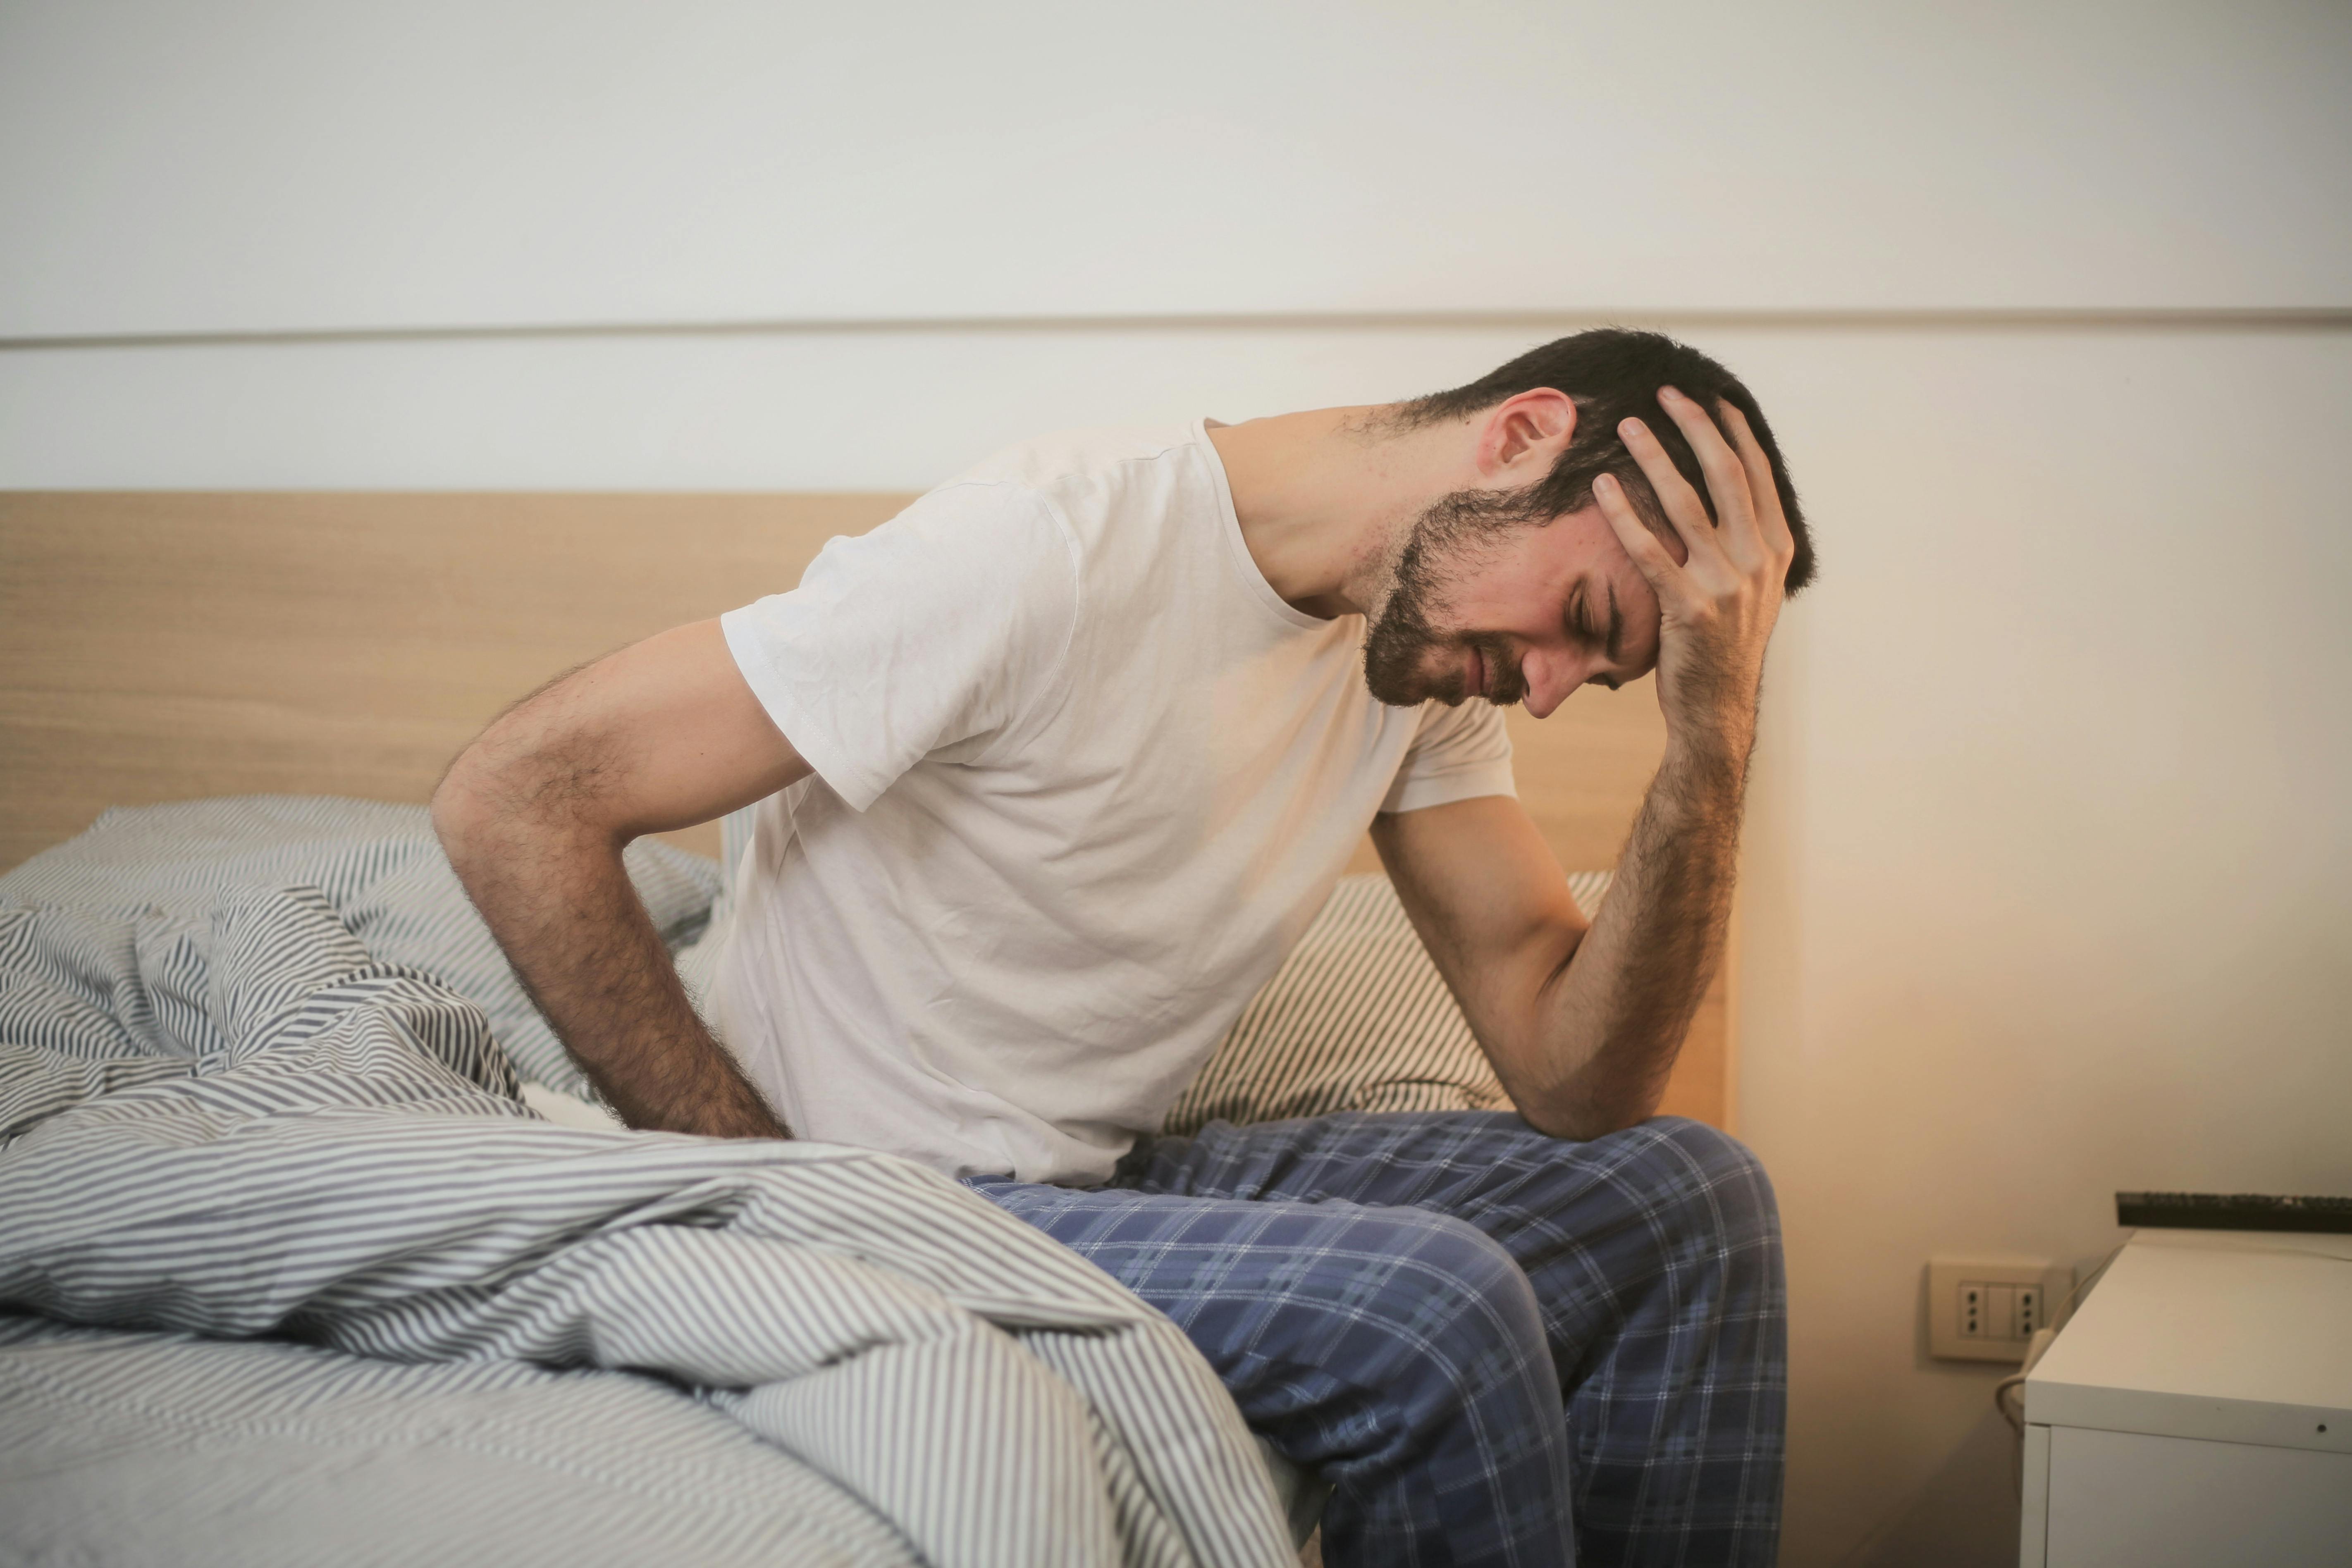 An upset and conflicted man holding his head while sitting on a bed | Source: Pexels